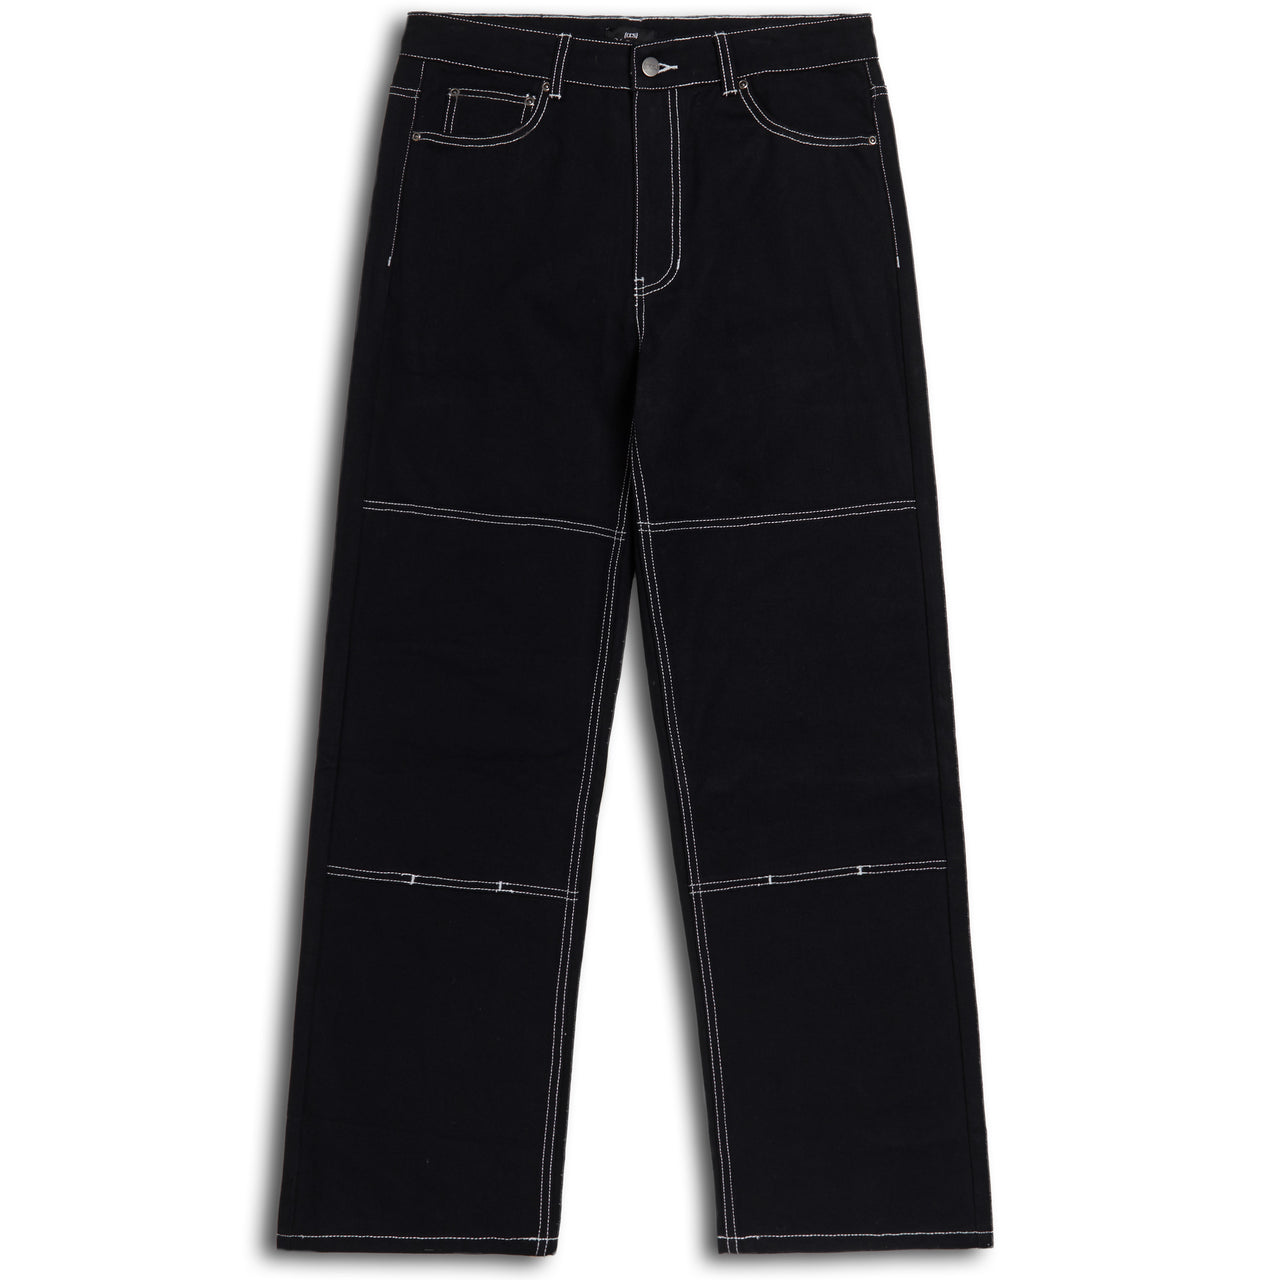 CCS Double Knee Original Relaxed Canvas Pants - Black/White image 3